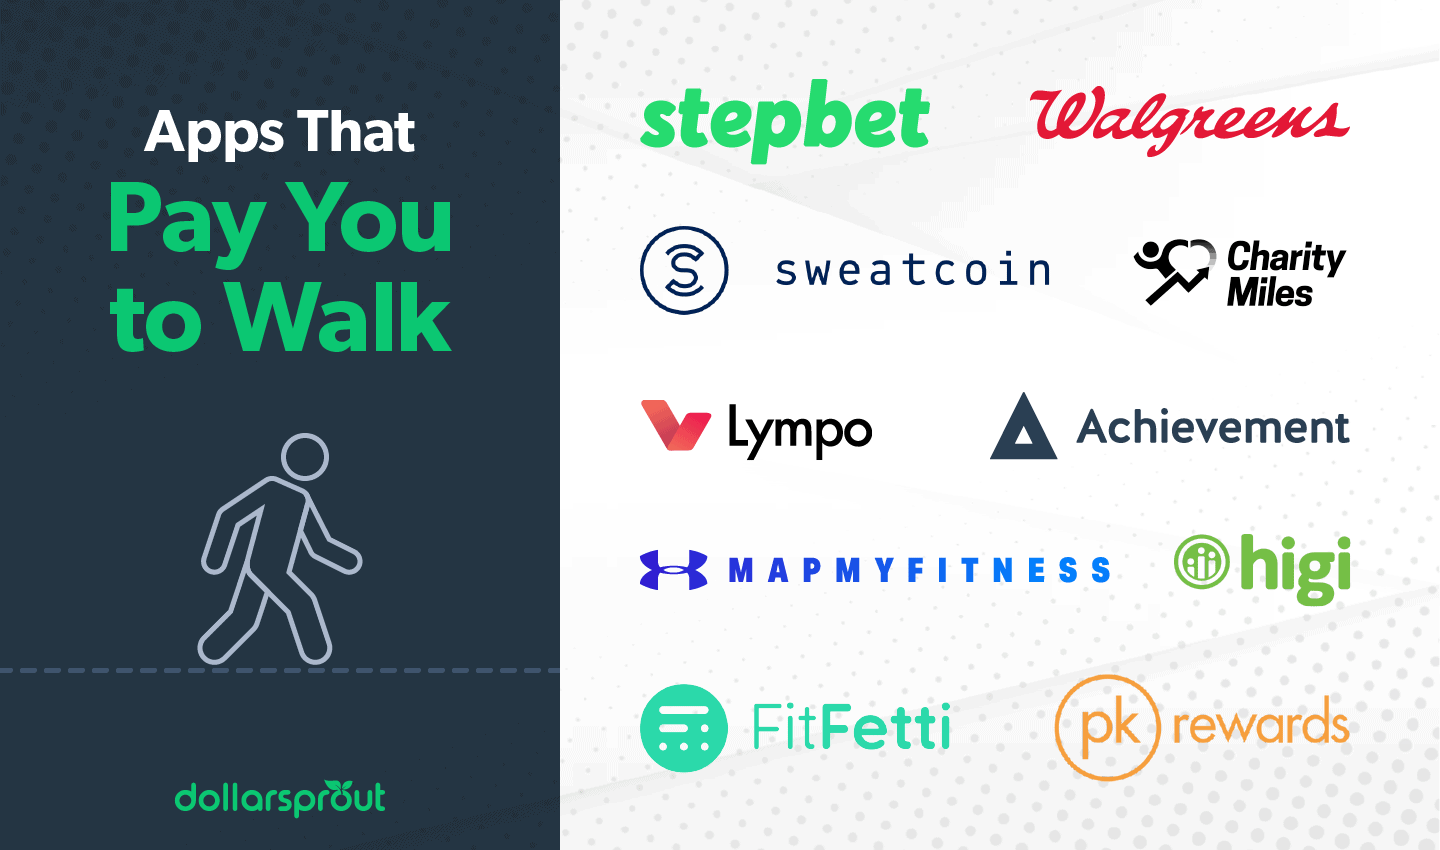 Apps that Pay You to Walk